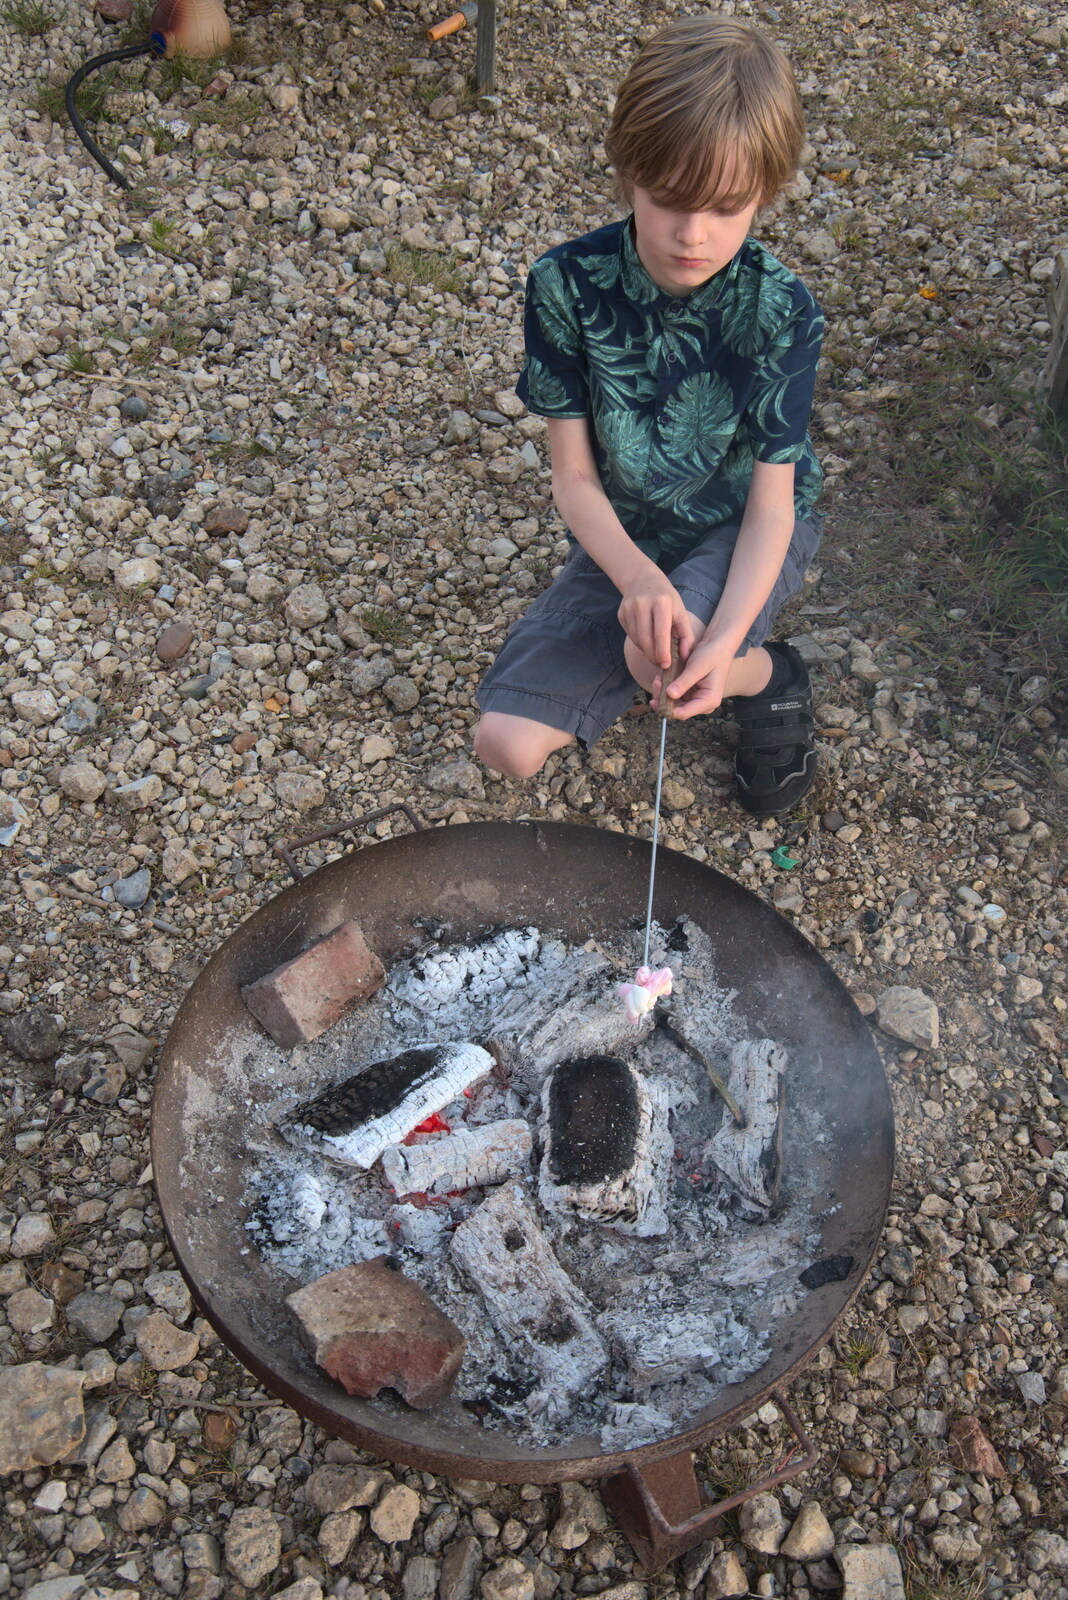 Harry sticks his marshmallow in the embers from An April Lockdown Miscellany, Eye, Suffolk - 10th April 2020